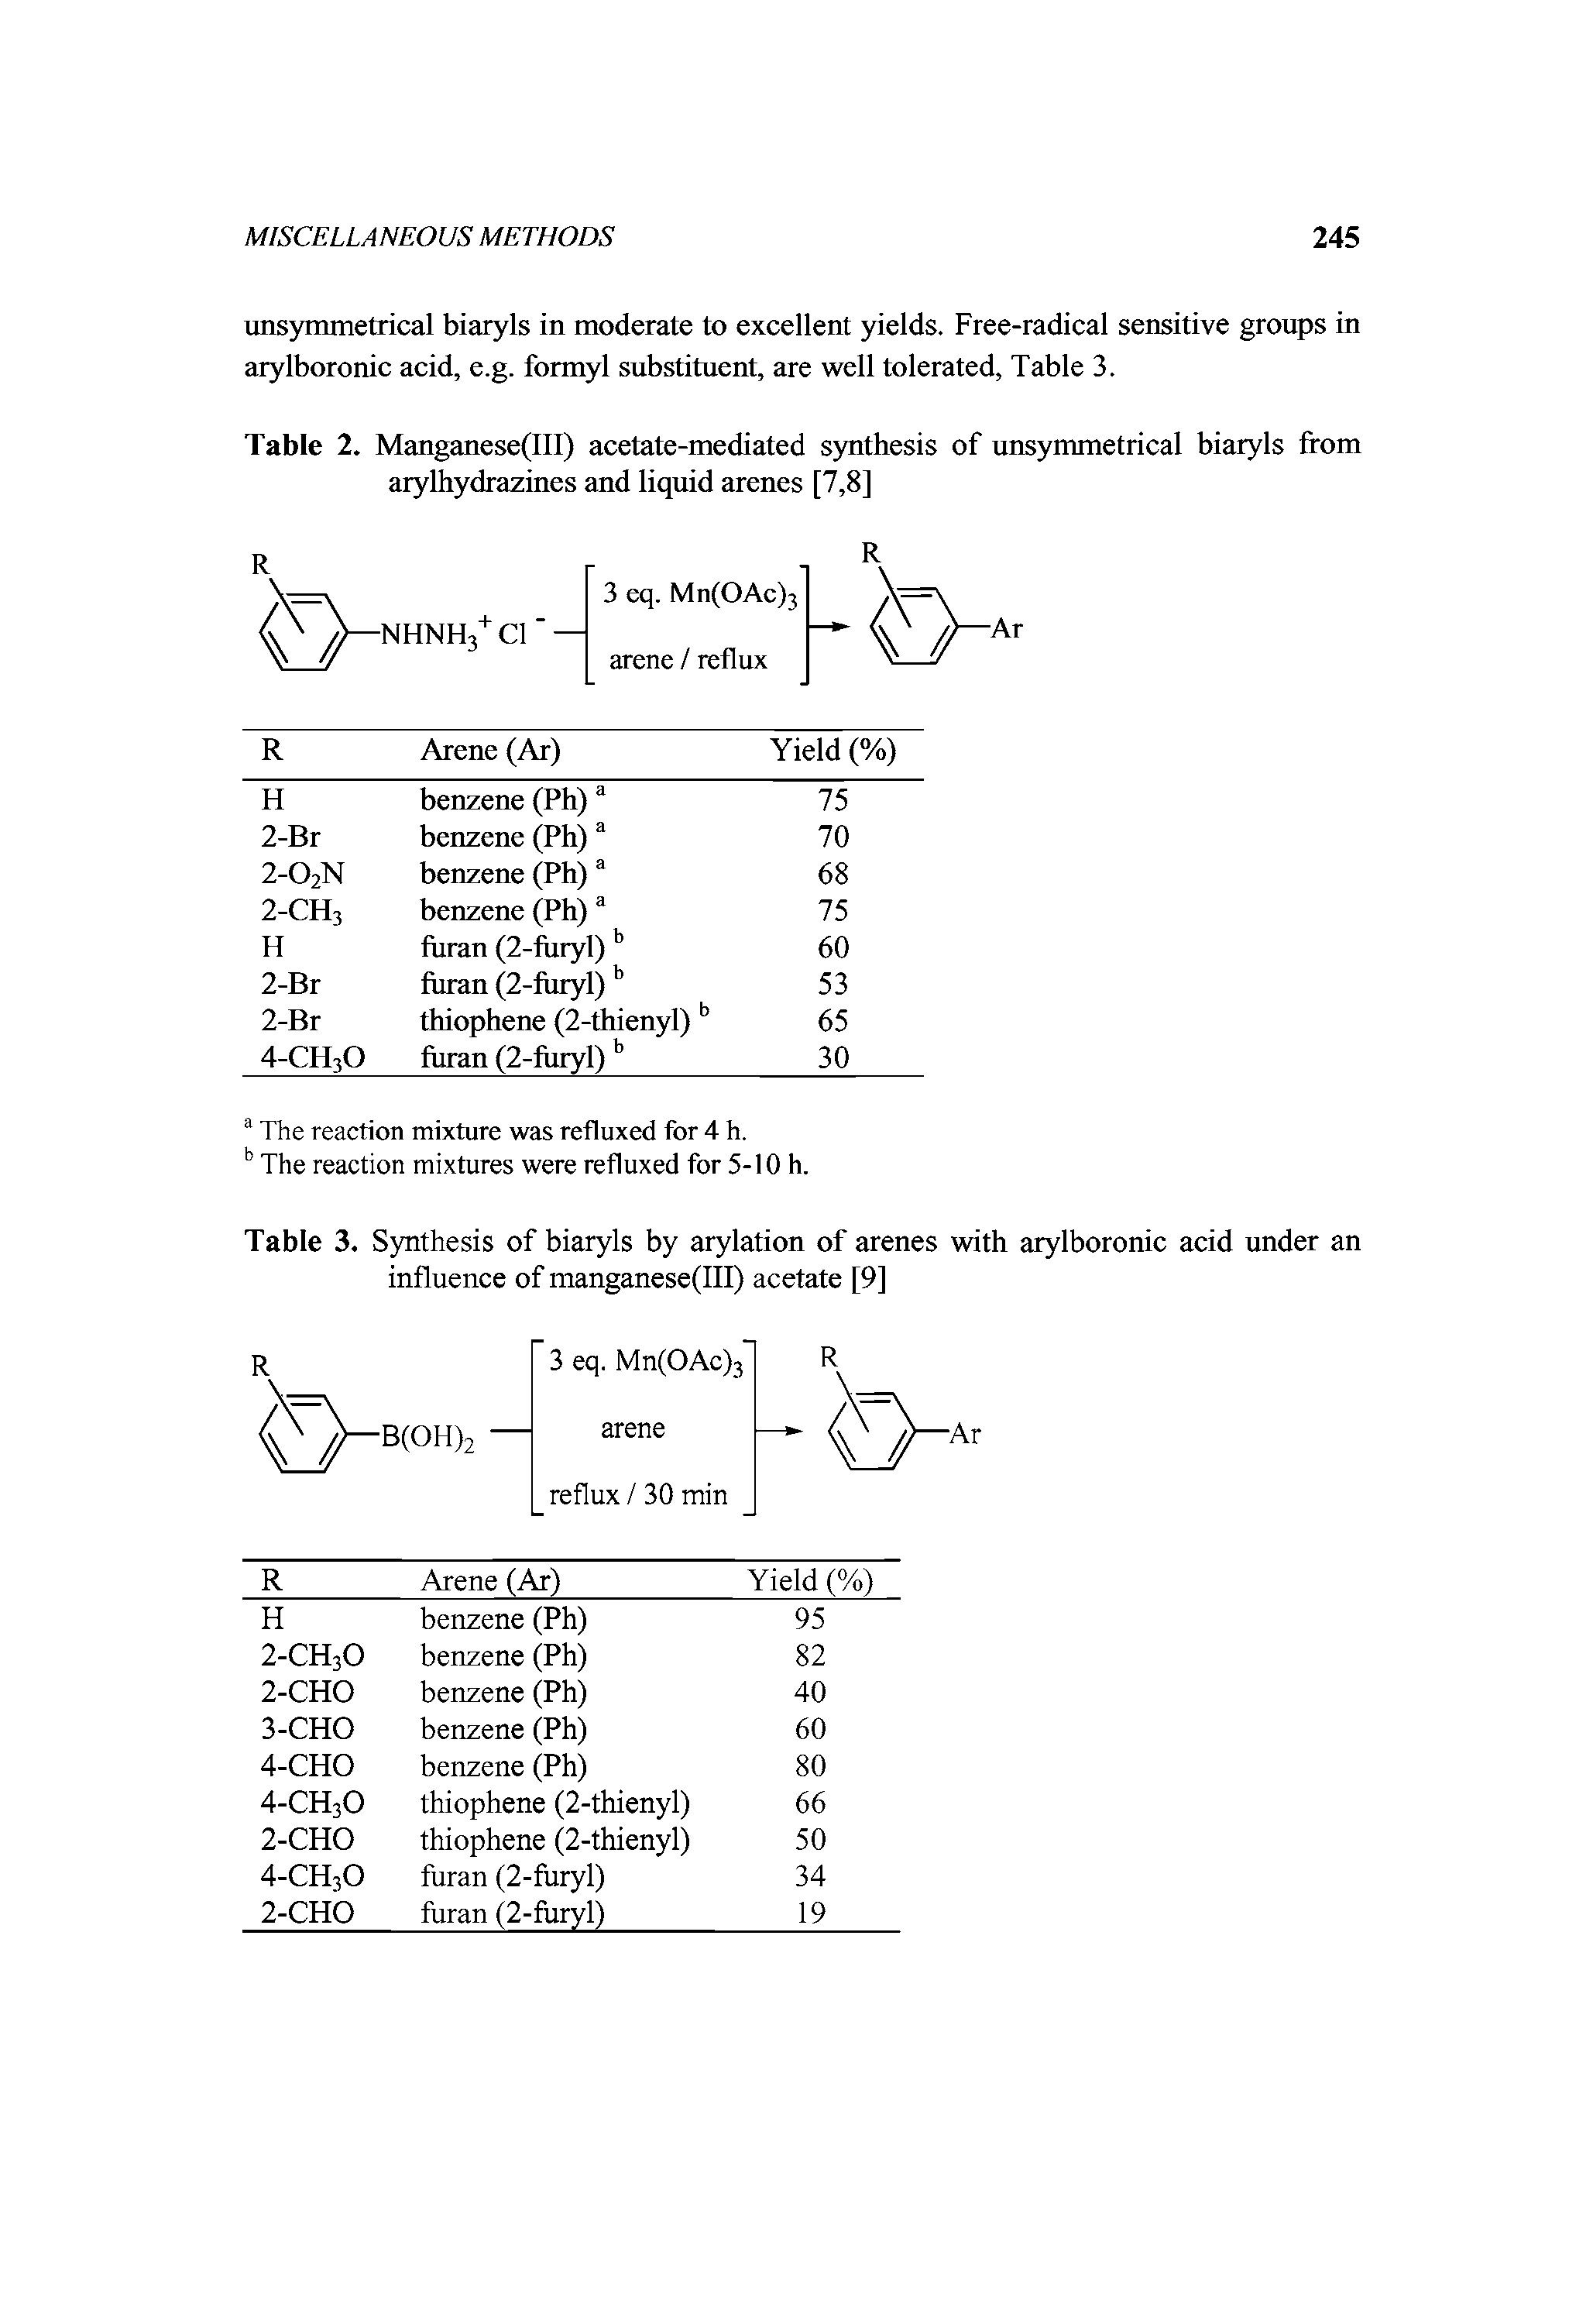 Table 3. Synthesis of biaryls by arylation of arenes with arylboronic acid under an influence of manganese(III) acetate [9]...